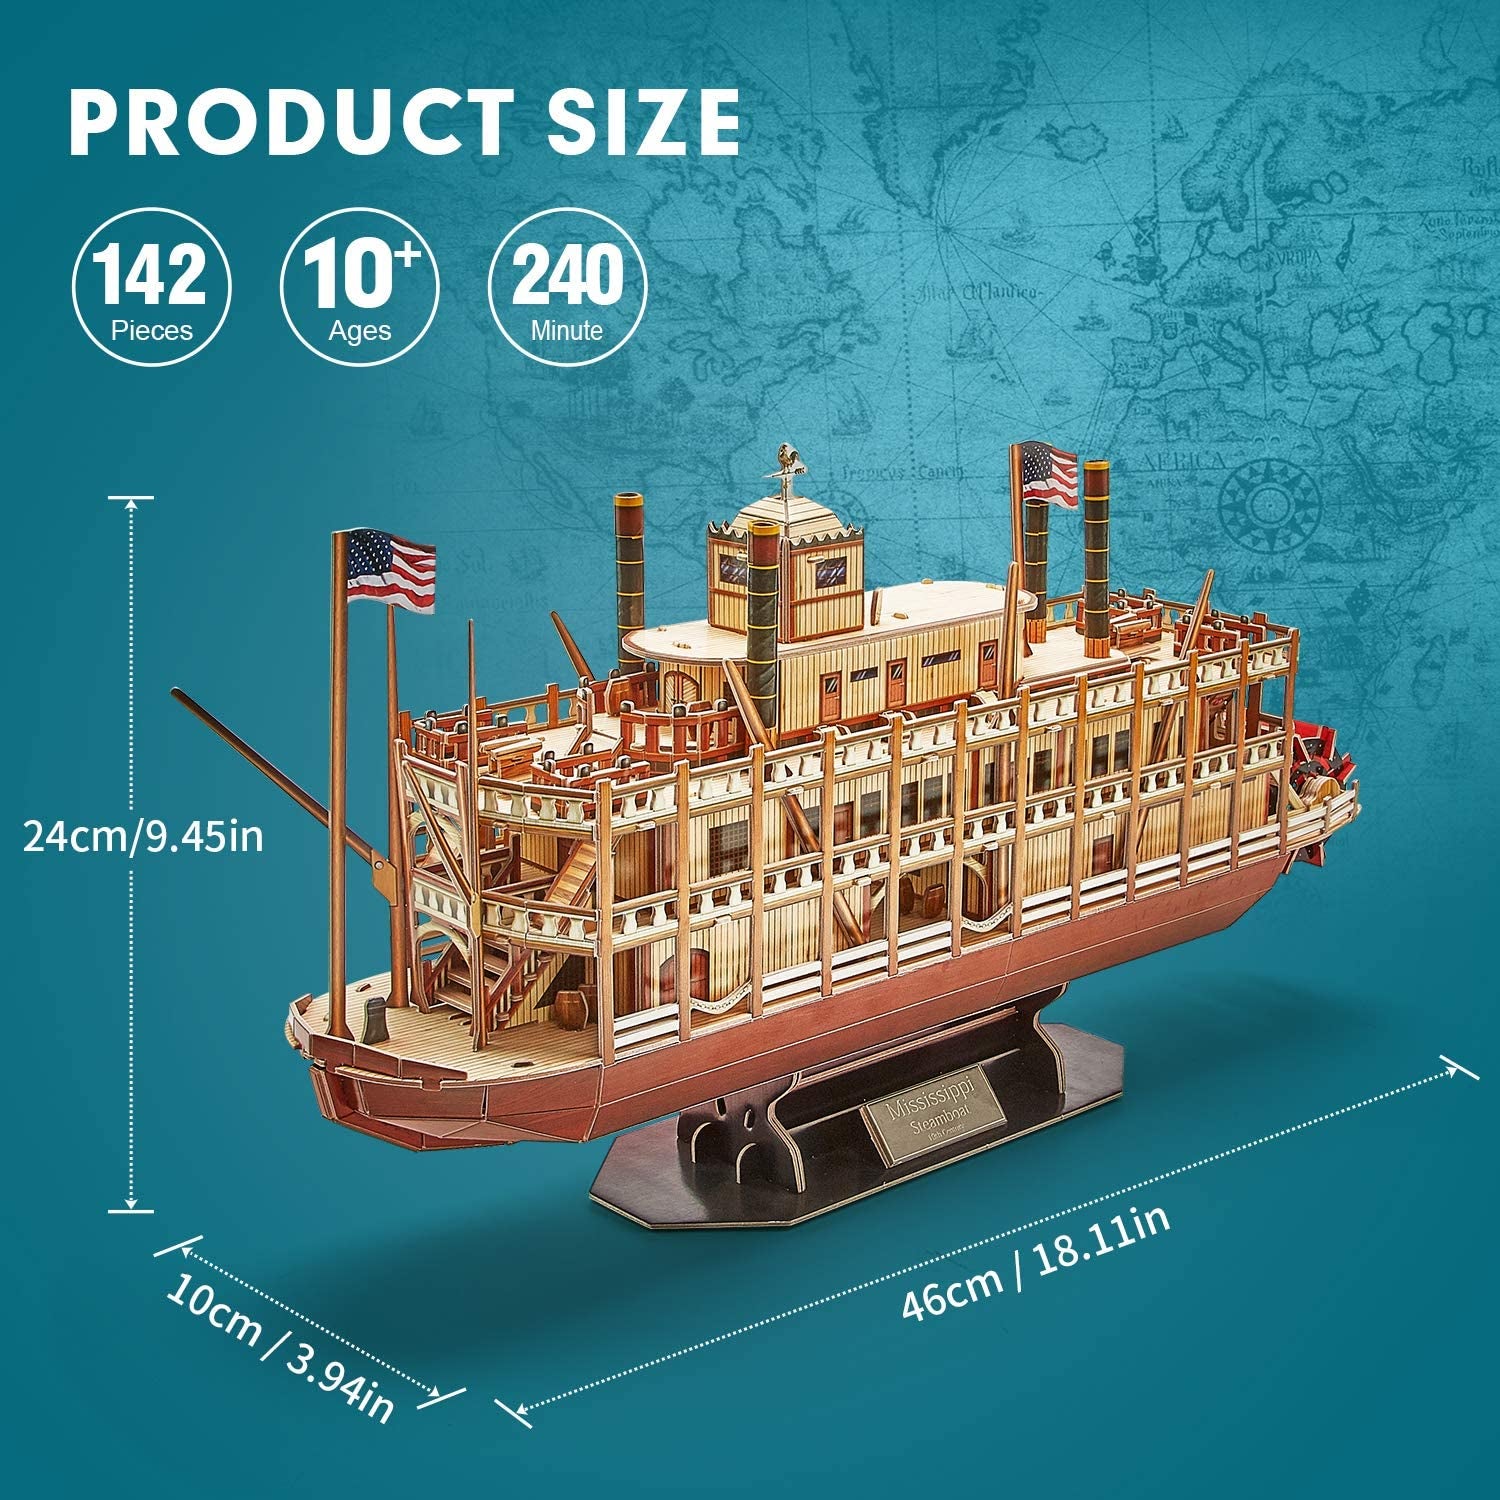 CubicFun 3D Vessel Puzzle "Mississippi Steamboat" Ship Model - US Worldwide Trading (142 Pieces)